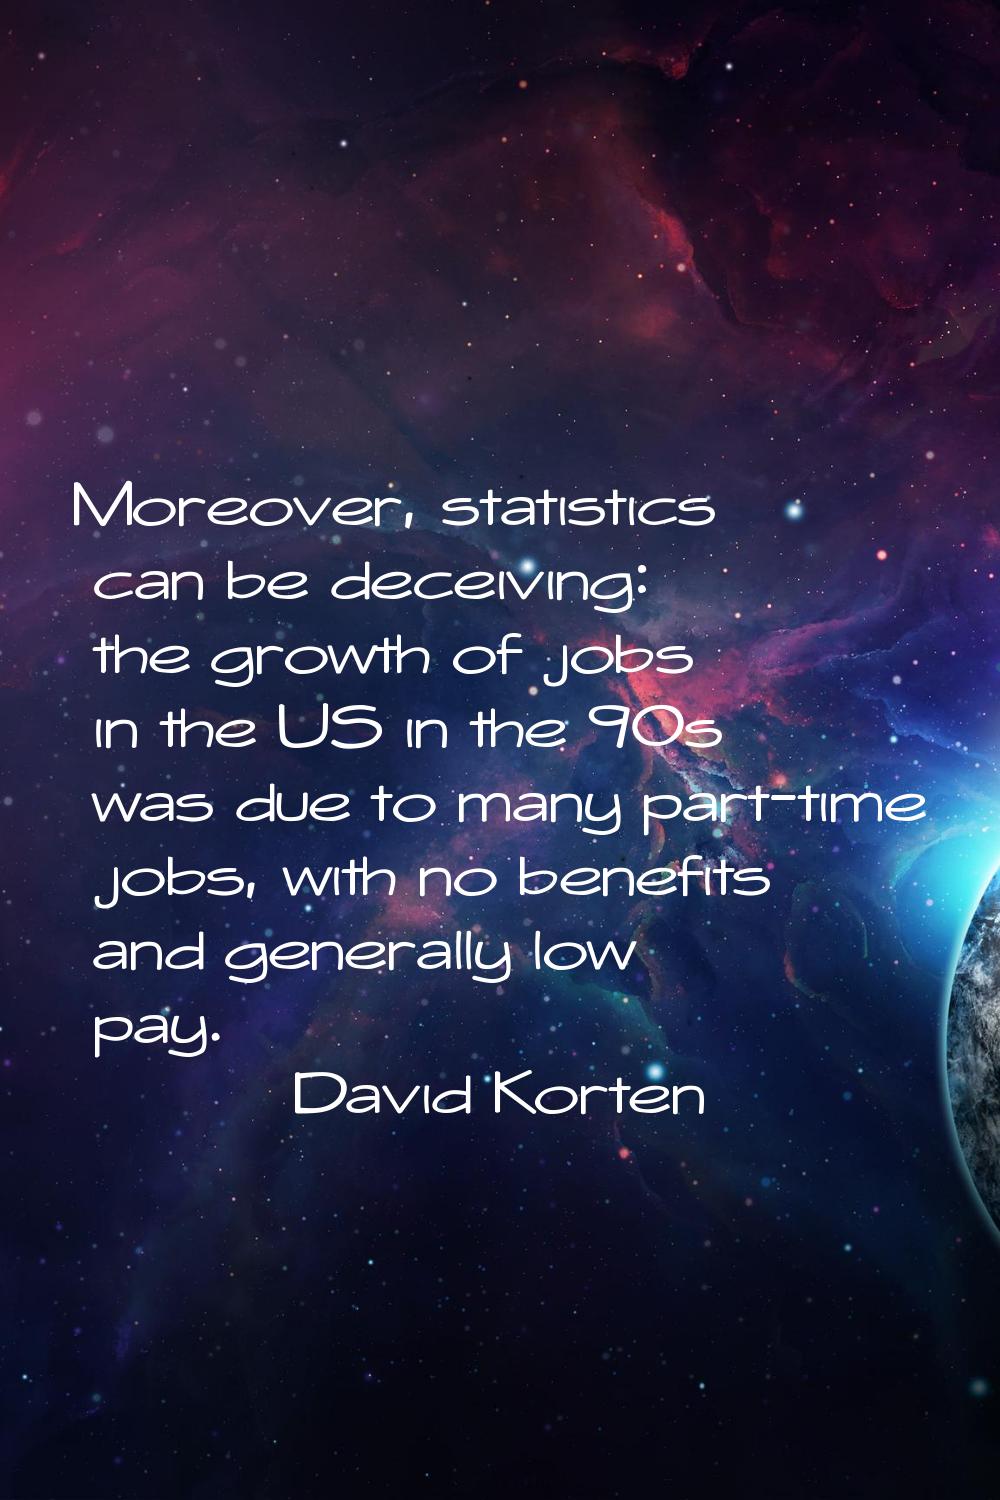 Moreover, statistics can be deceiving: the growth of jobs in the US in the 90s was due to many part